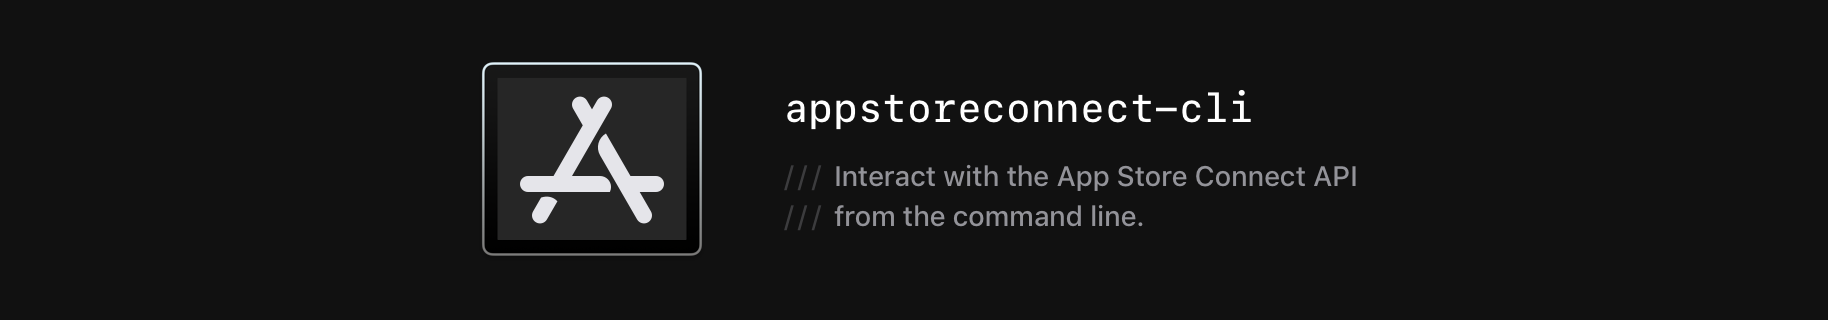 App Store Connect CLI - Interact with the App Store Connect API from the command line.